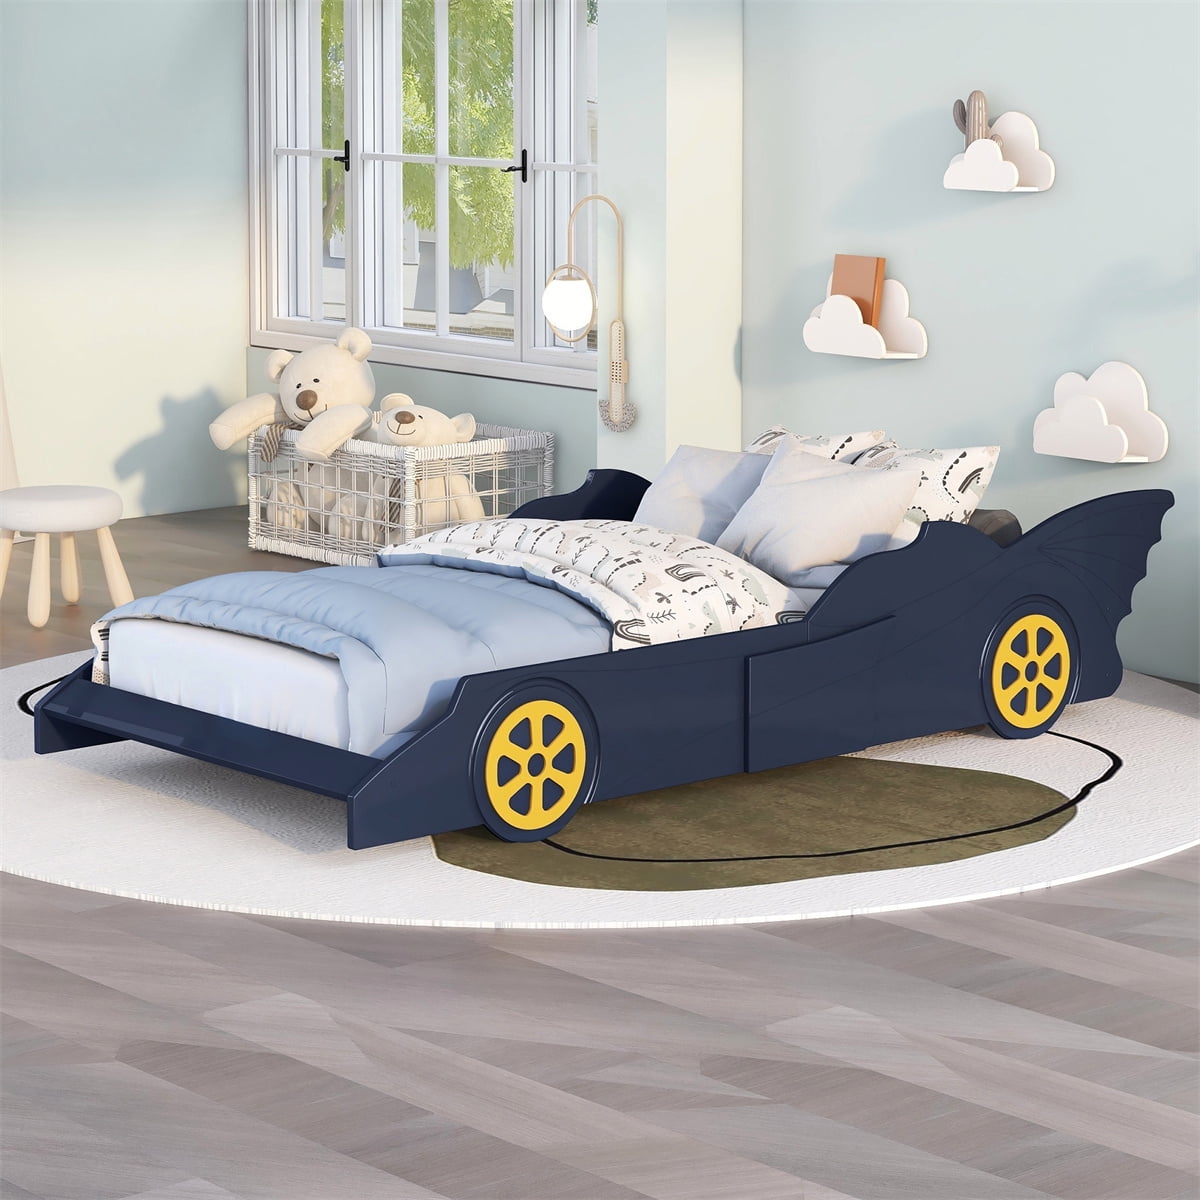 Twin Size Race Car Bed with Wheels, Wood Platform Bed Frame with Slats ...